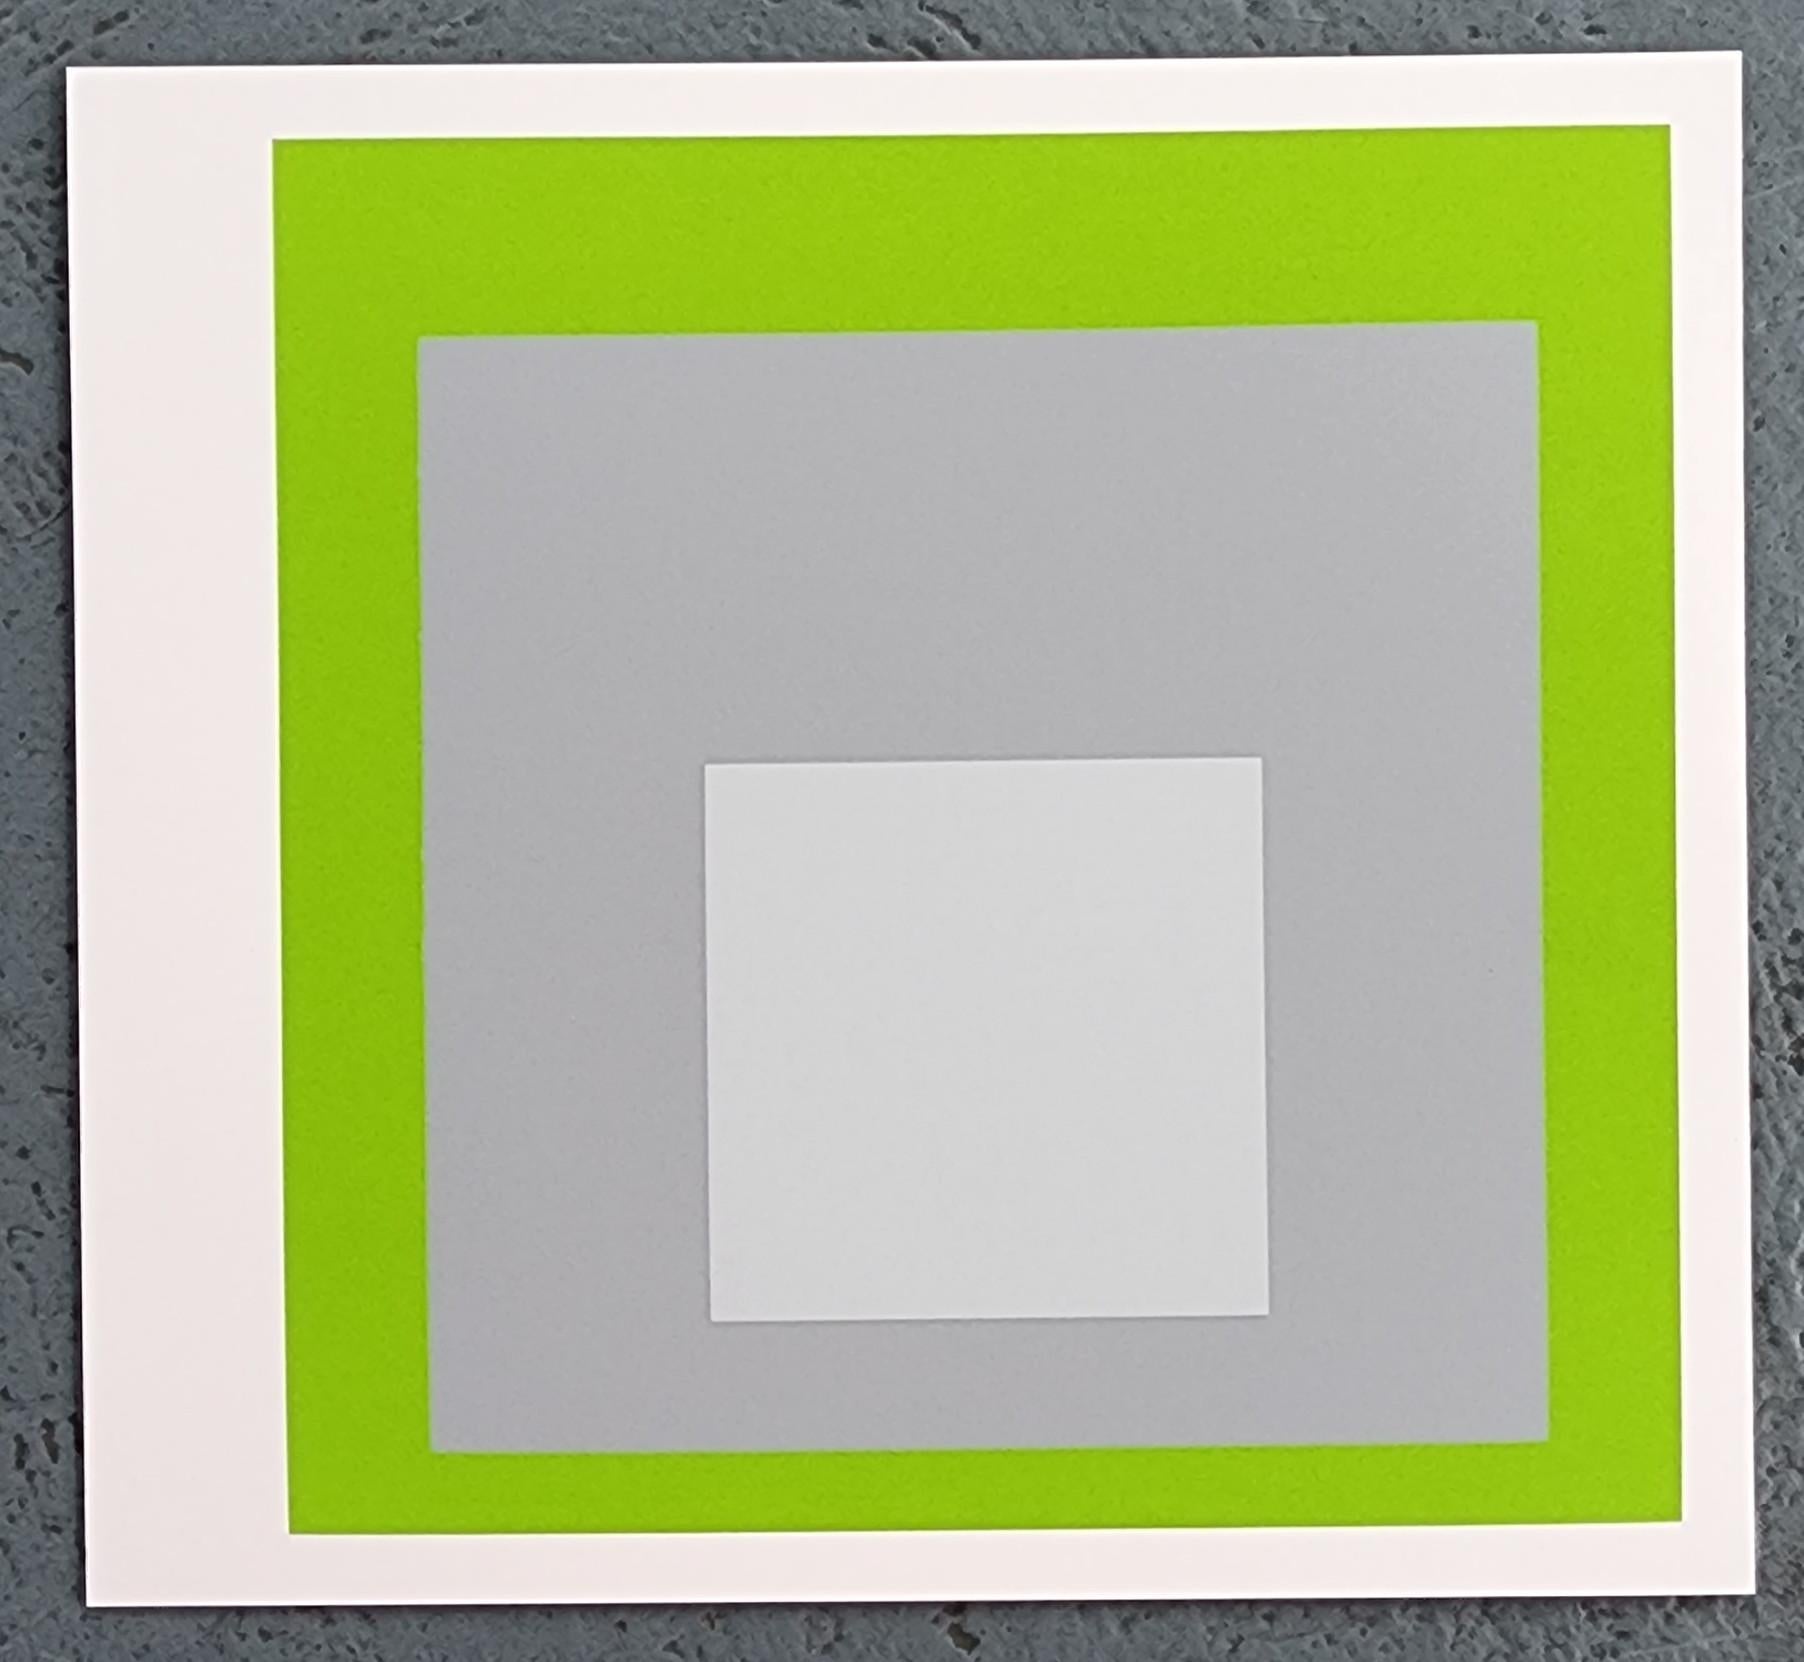 Josef Albers
Homage to the Square: White Marker (from 